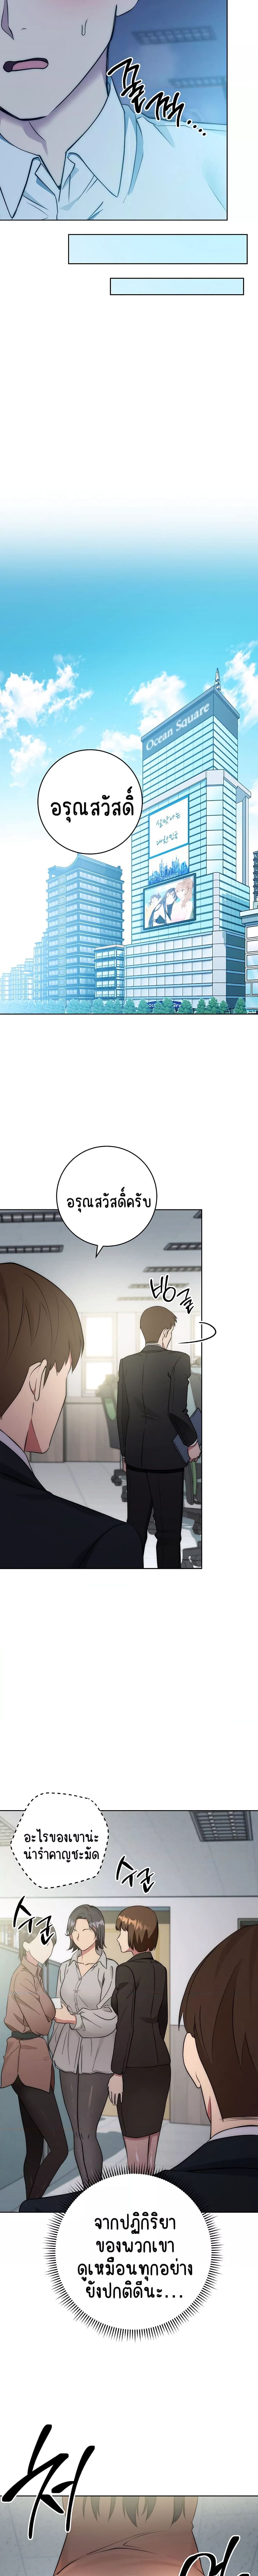 Outsider: The Invisible Man ตอนที่ 3 ภาพ 20